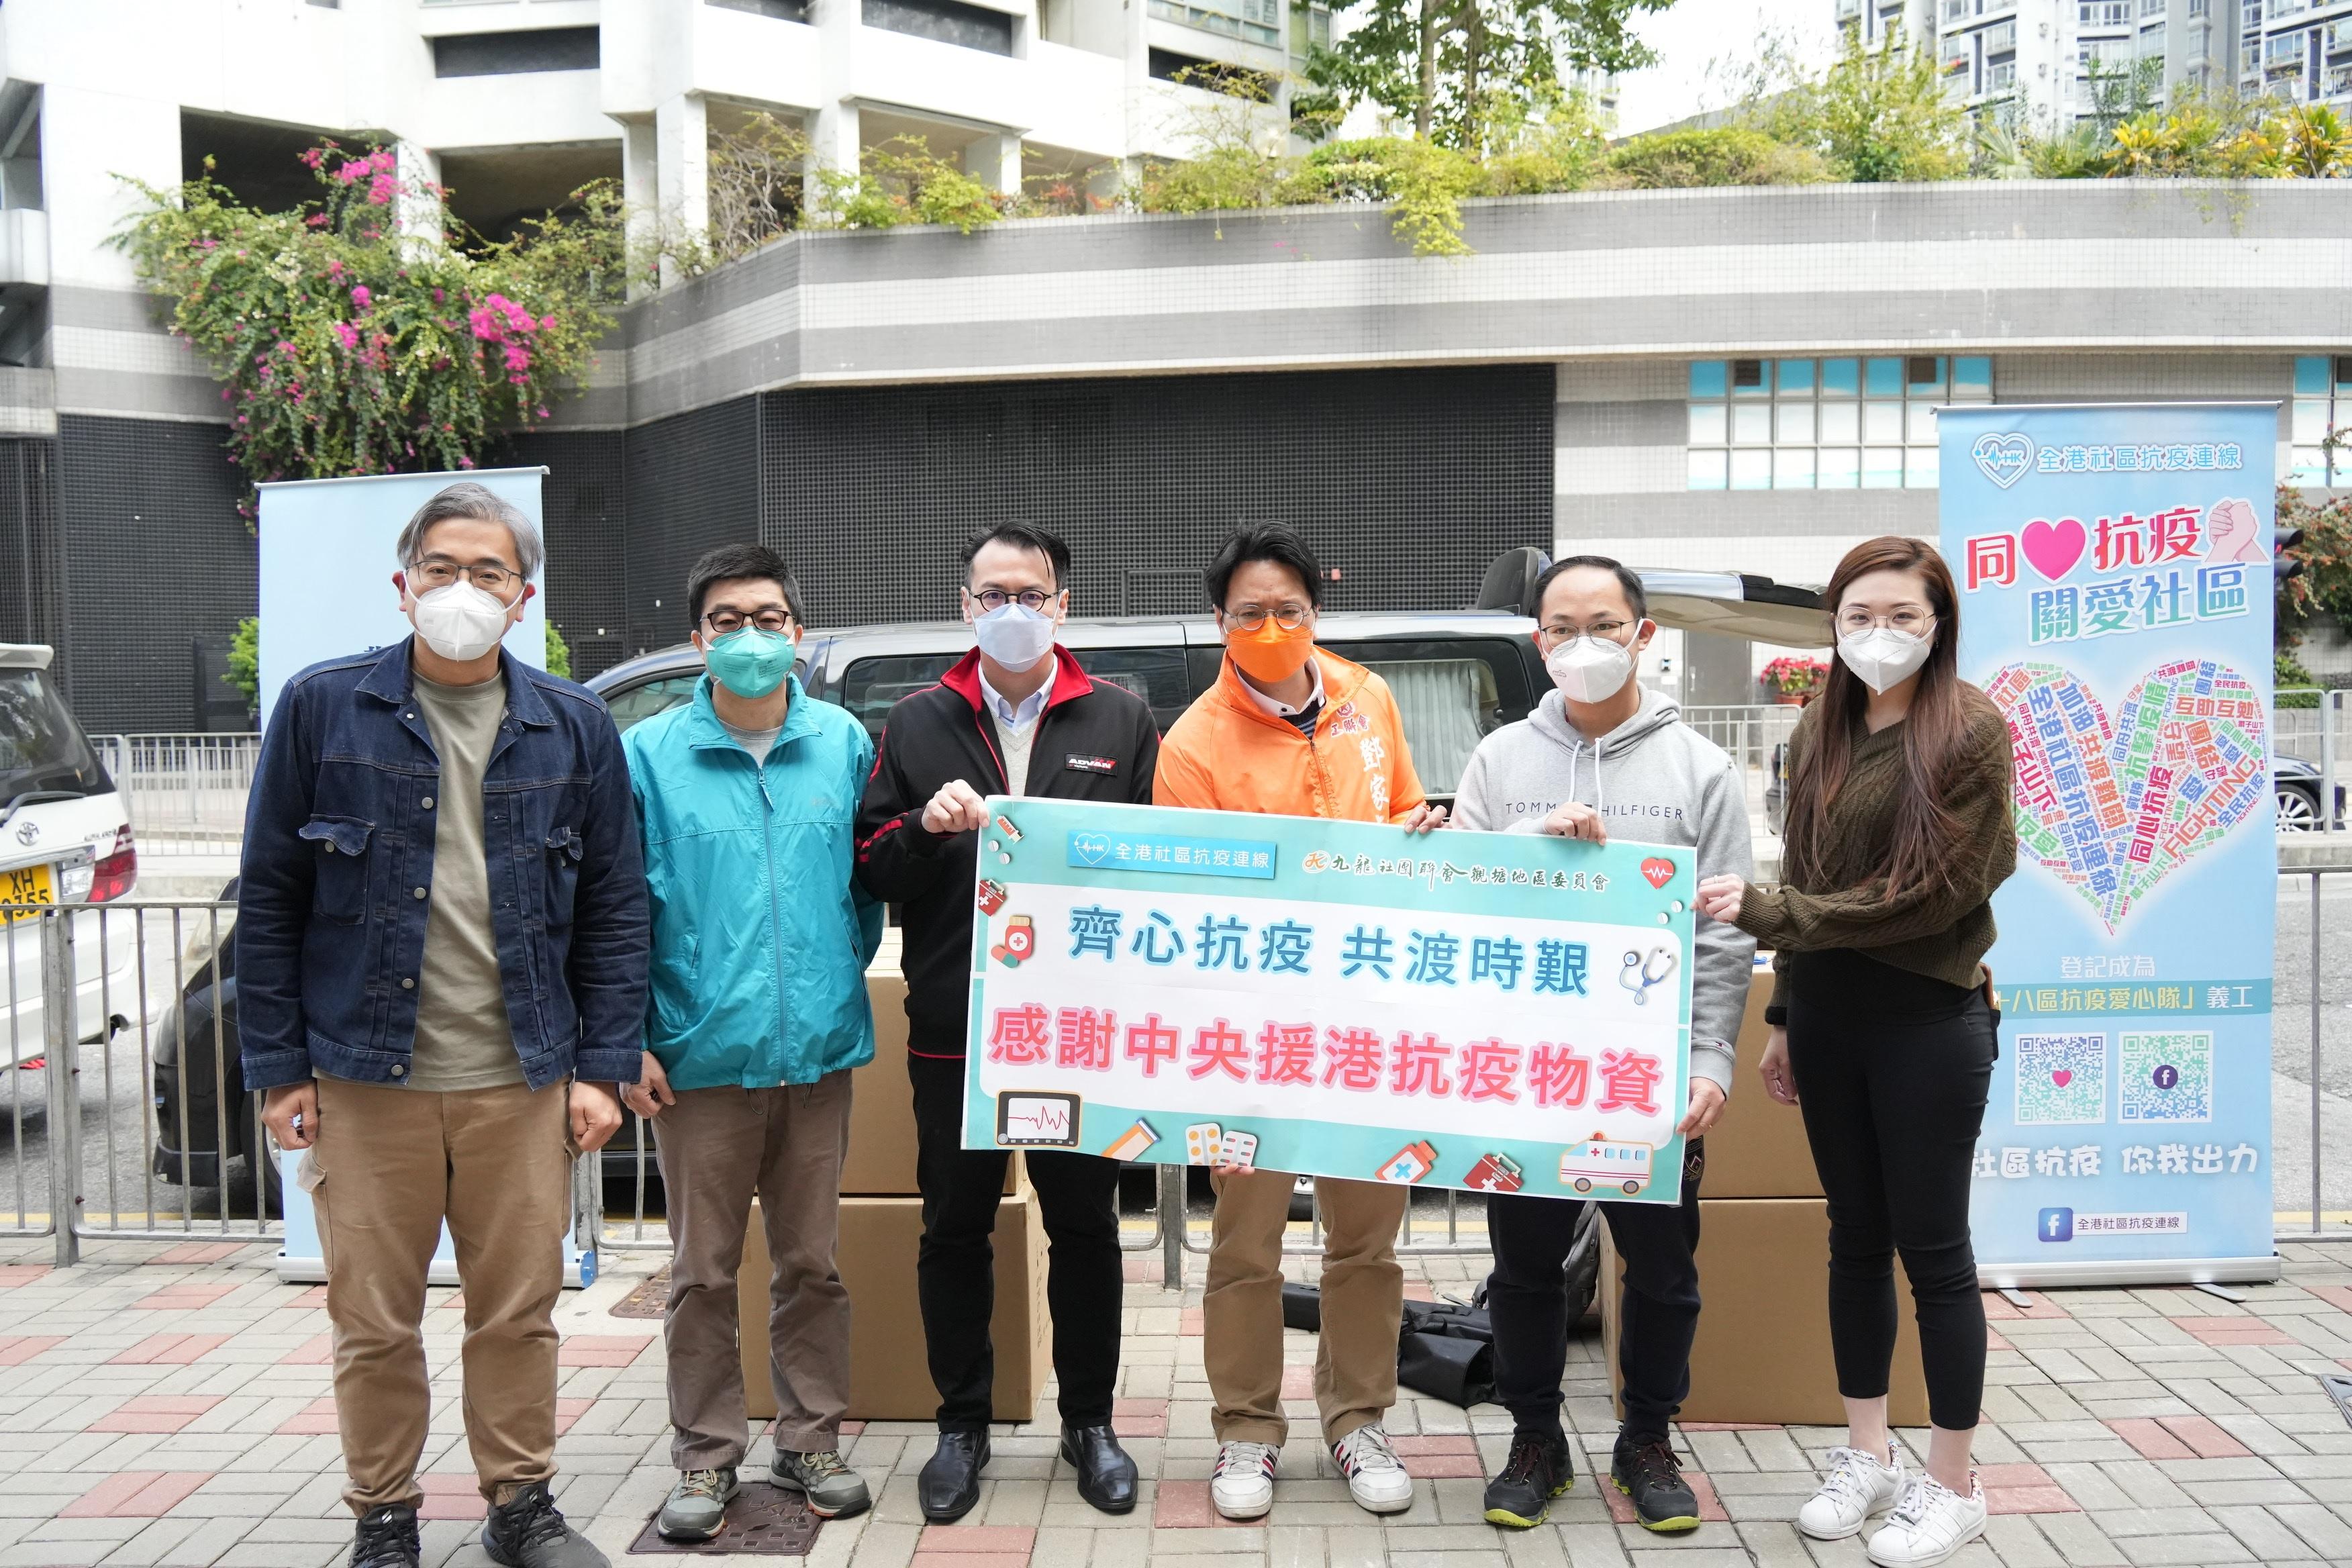 The Kwun Tong District Office, together with the Hong Kong Community Anti- Coronavirus Link, set up street booths in the district, and distributed COVID-19 rapid test kits to residents, cleansing workers and property management staff living and working in Cha Kwo Ling, Lei Yue Mun and Laguna City today (February 28).
